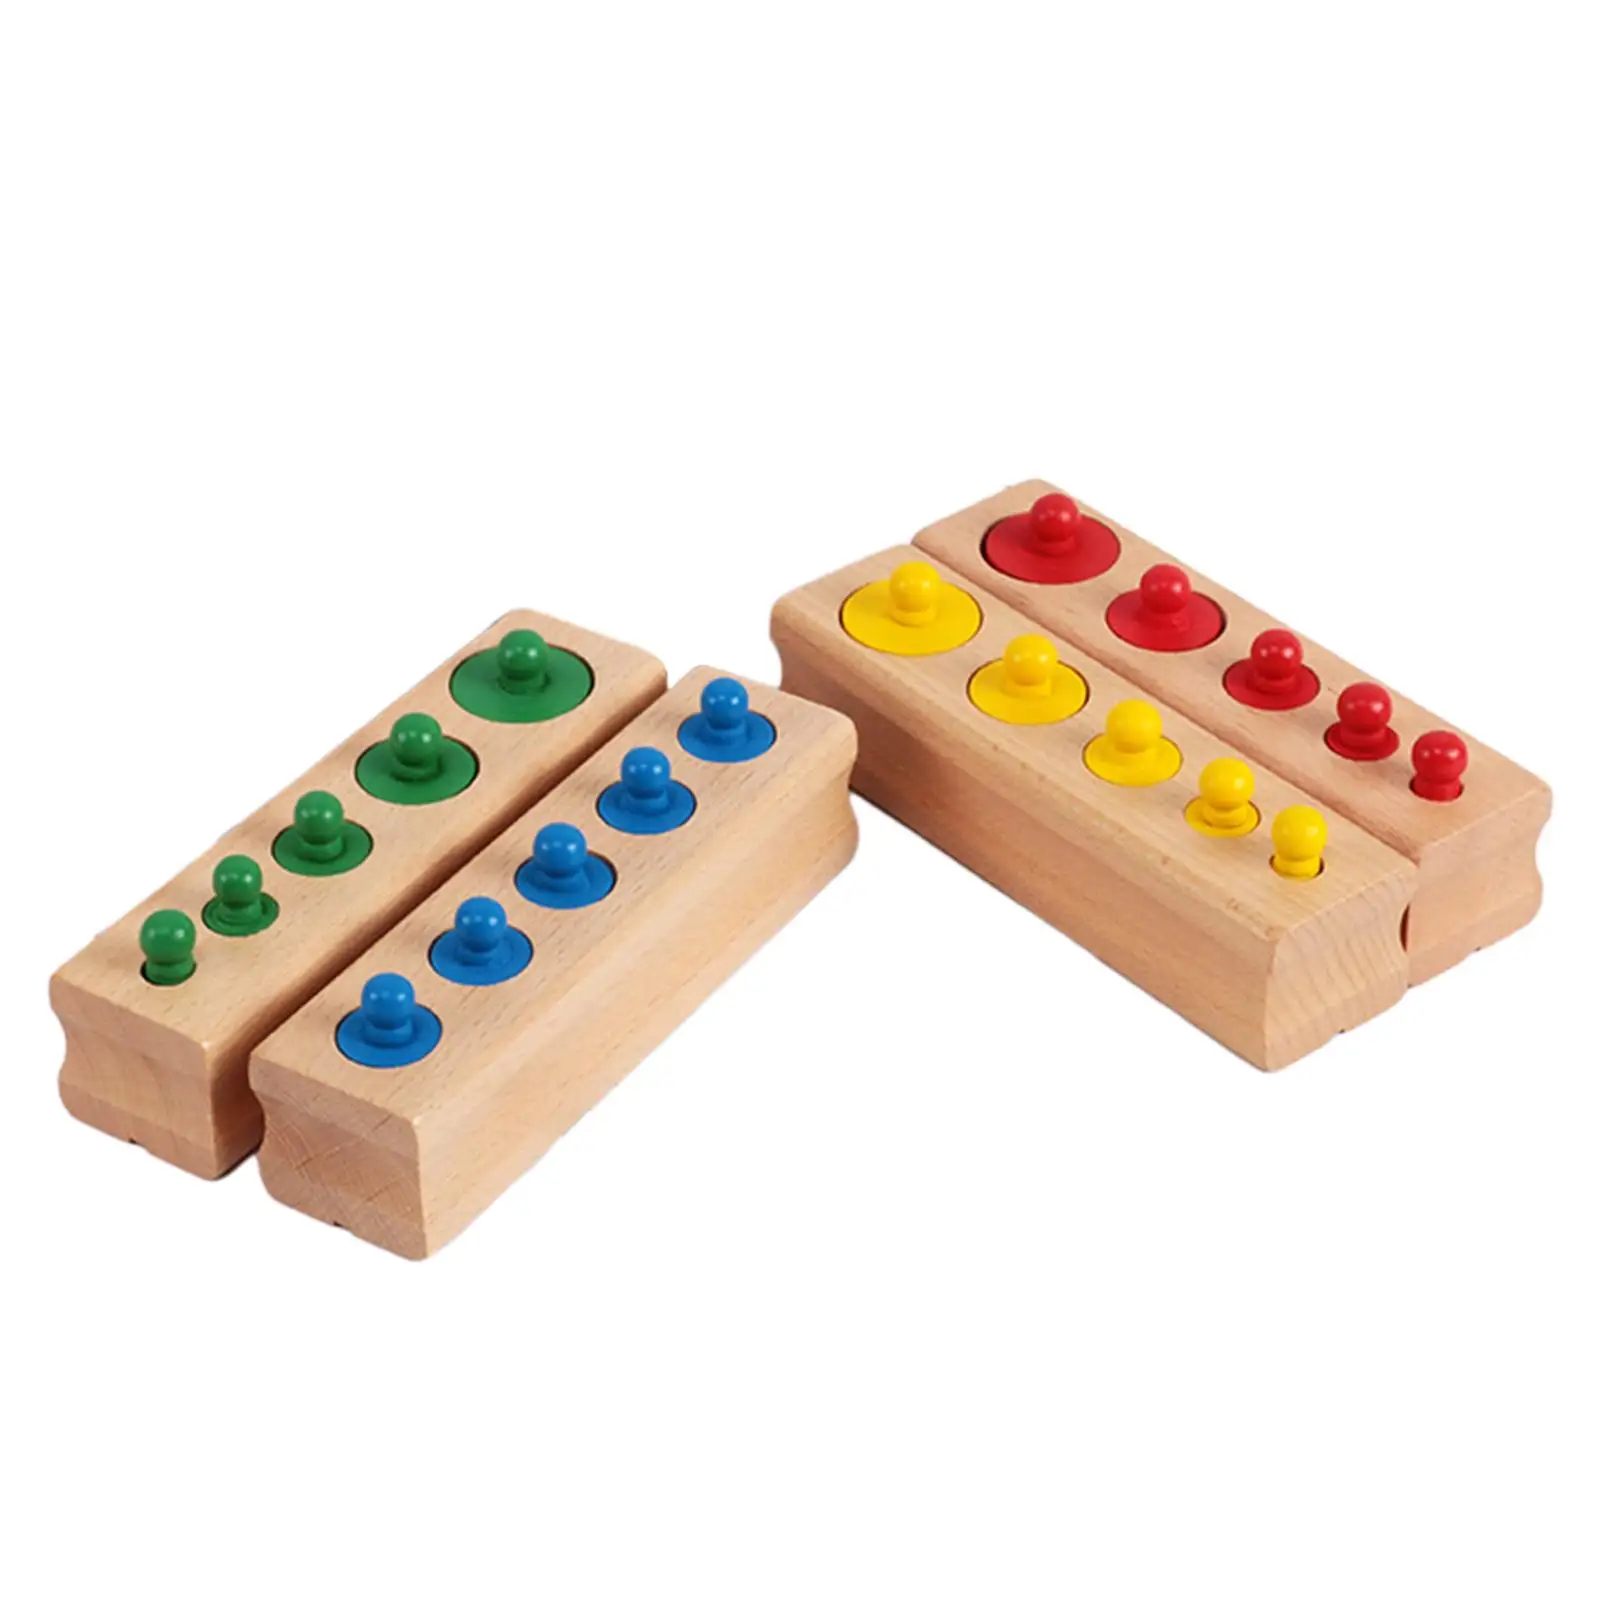 4 Pieces Montessori Toy Early Development Knobbed Cylinders Blocks Socket Sensory Toys for Preschool Toys School Toddlers Kids